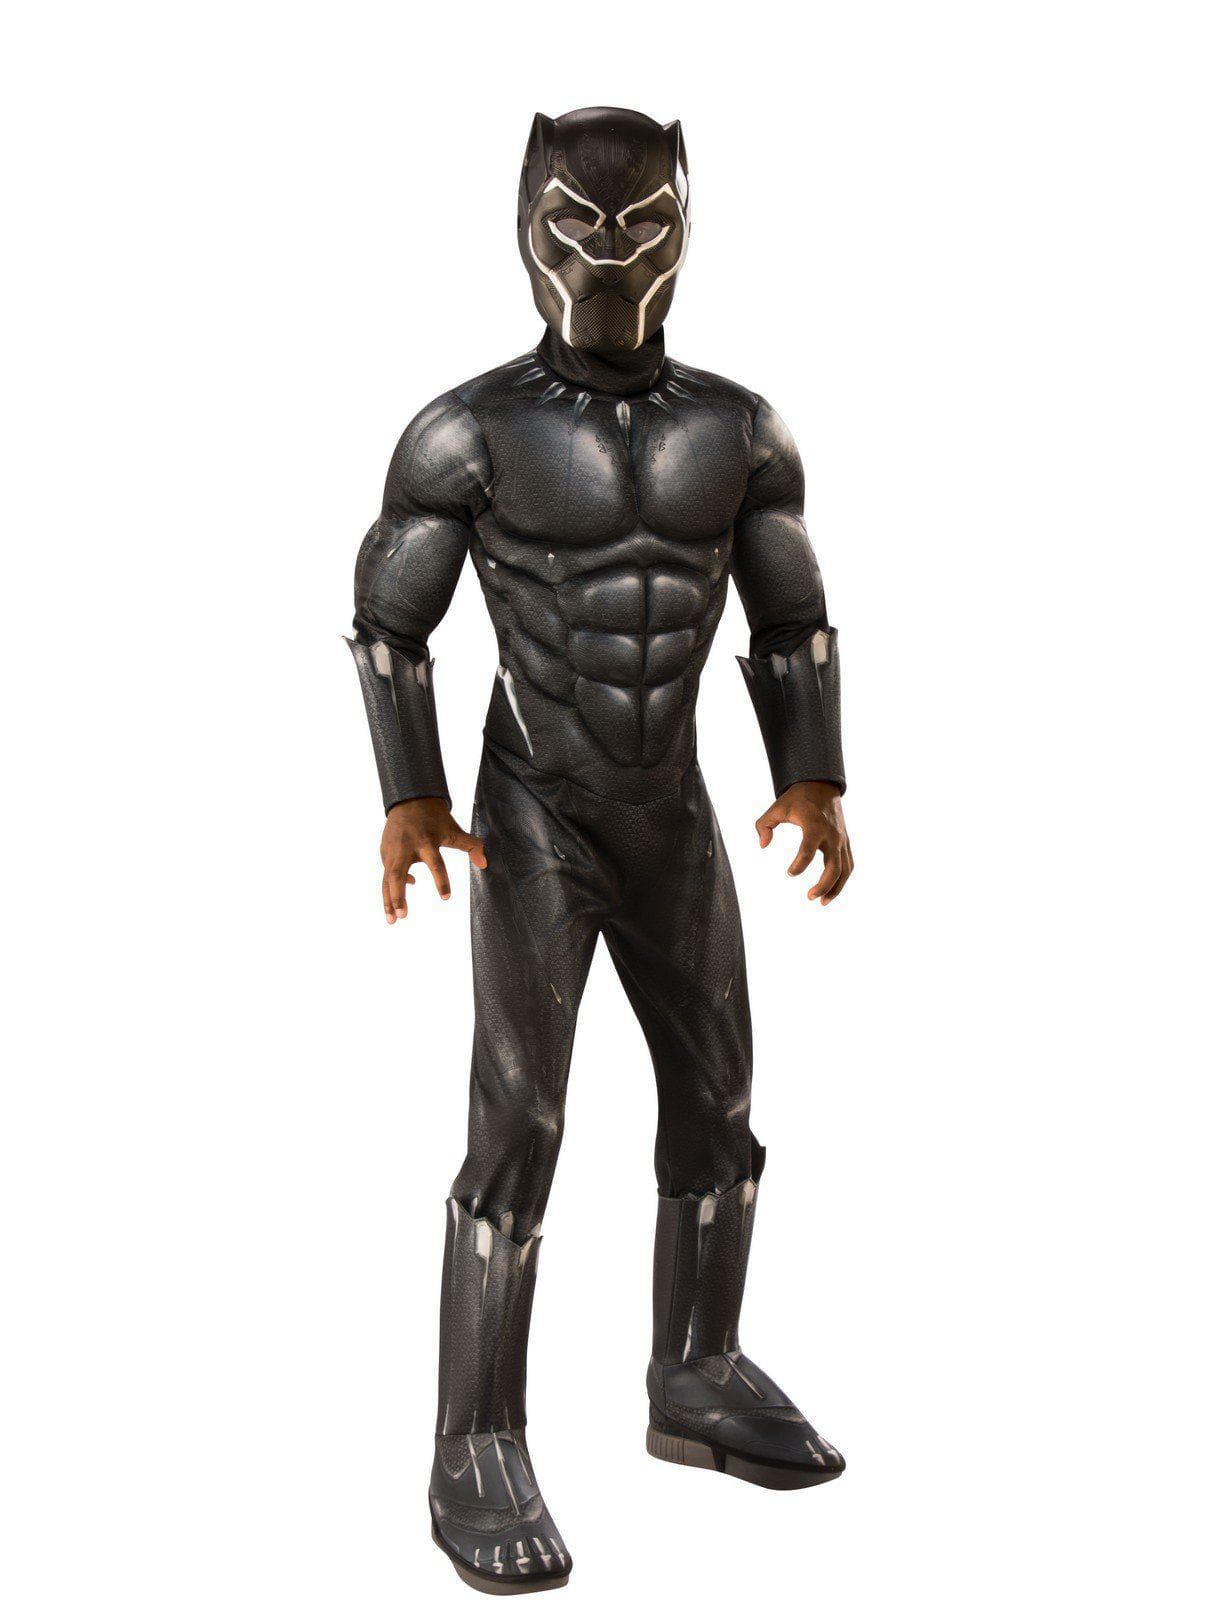 Kids Black Panther Black Panther Deluxe Costume - costumes.com